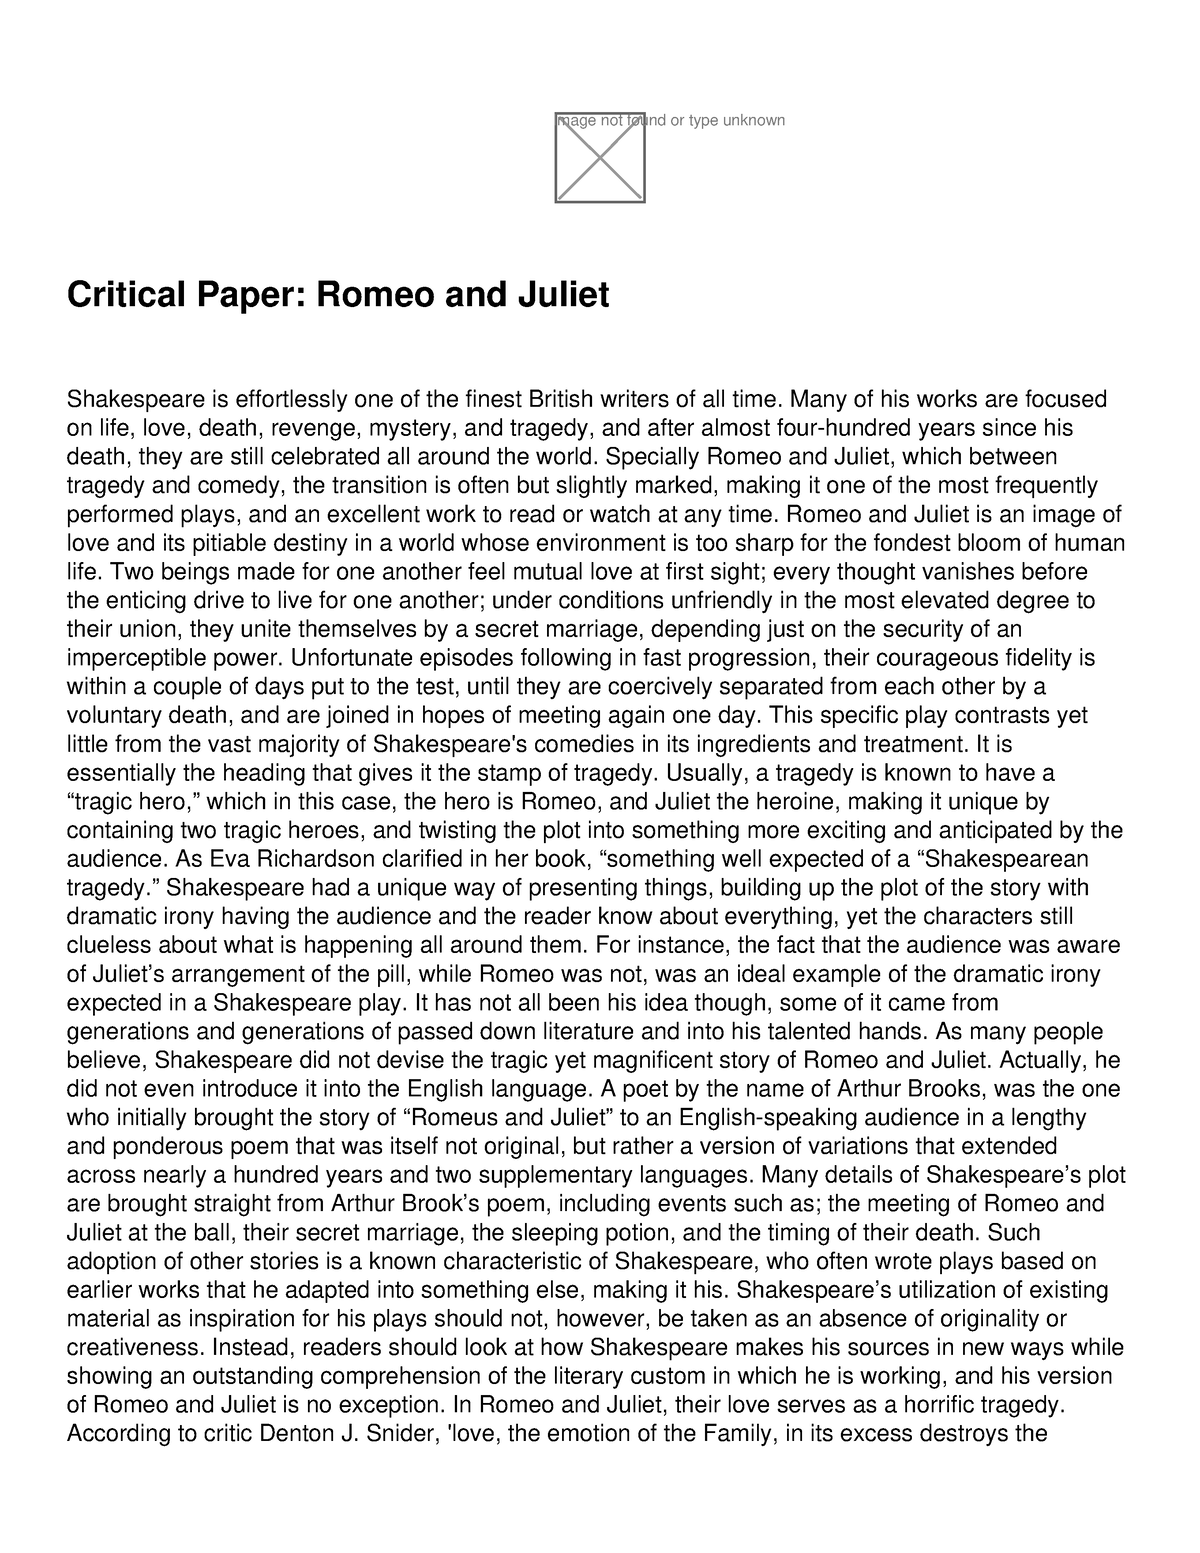 romeo and juliet research paper